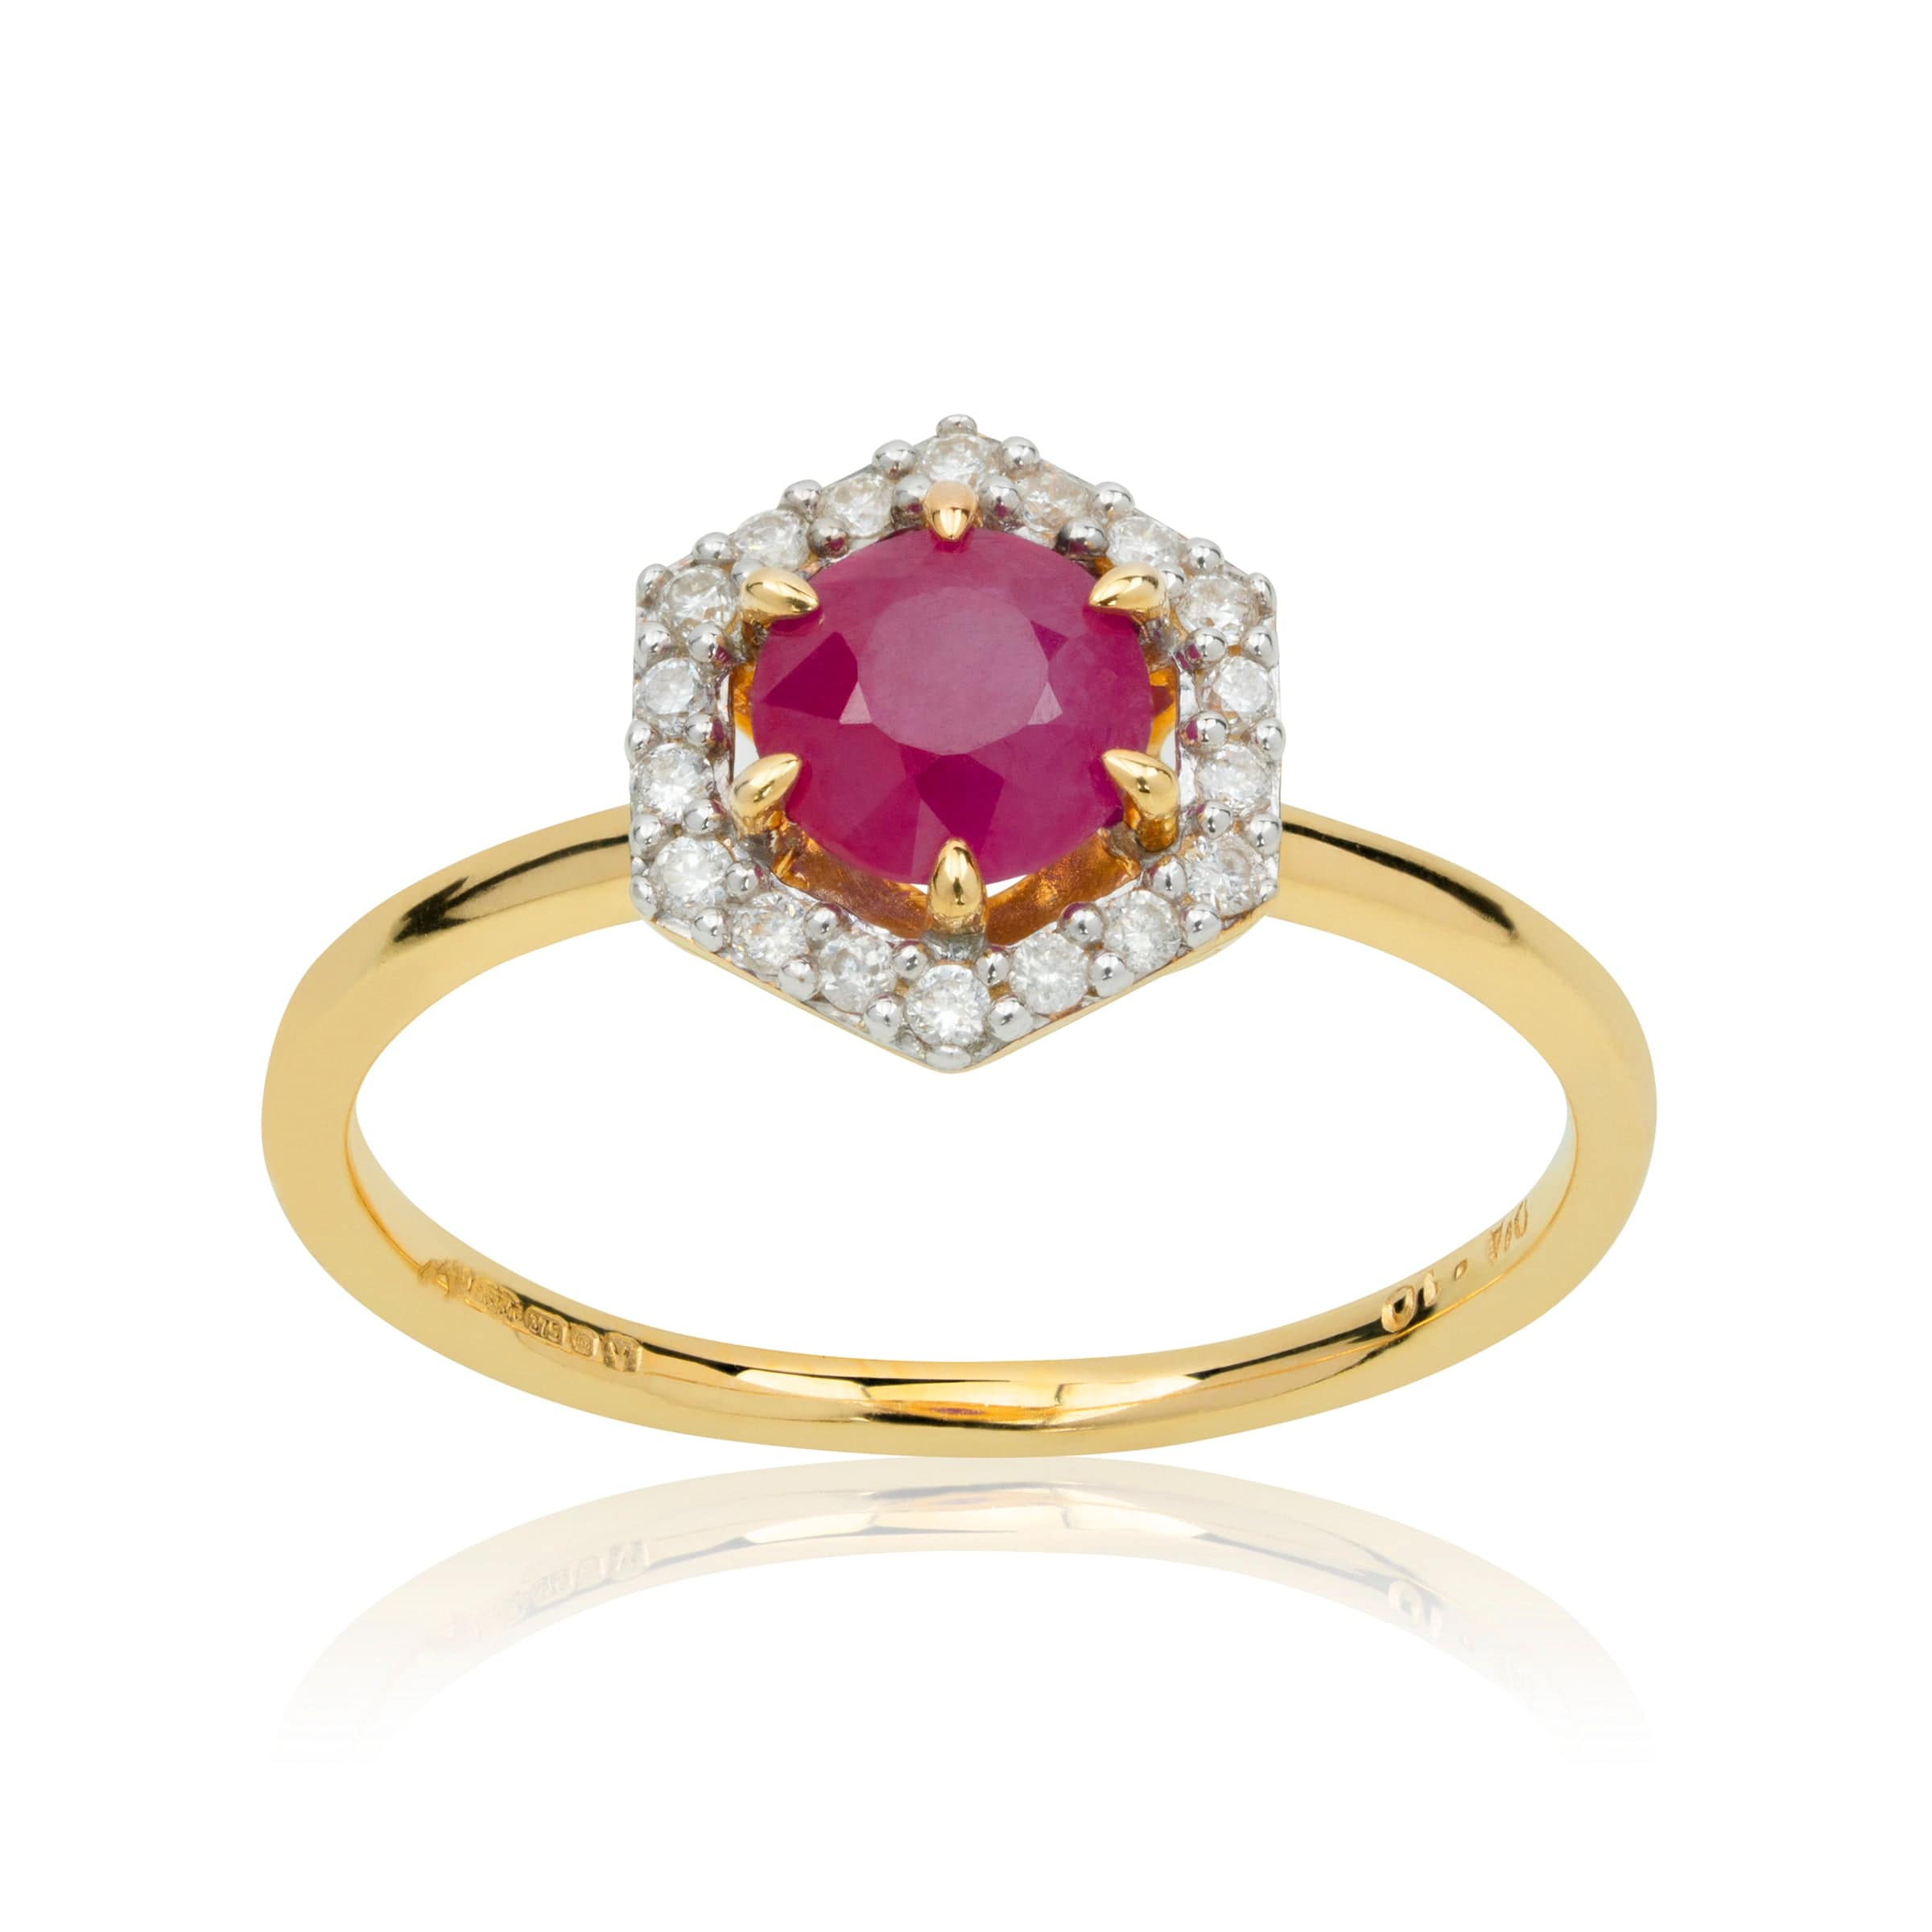 133R94860318 18ct Yellow Gold 0.92ct Ruby & Diamond Halo Engagement Ring 4